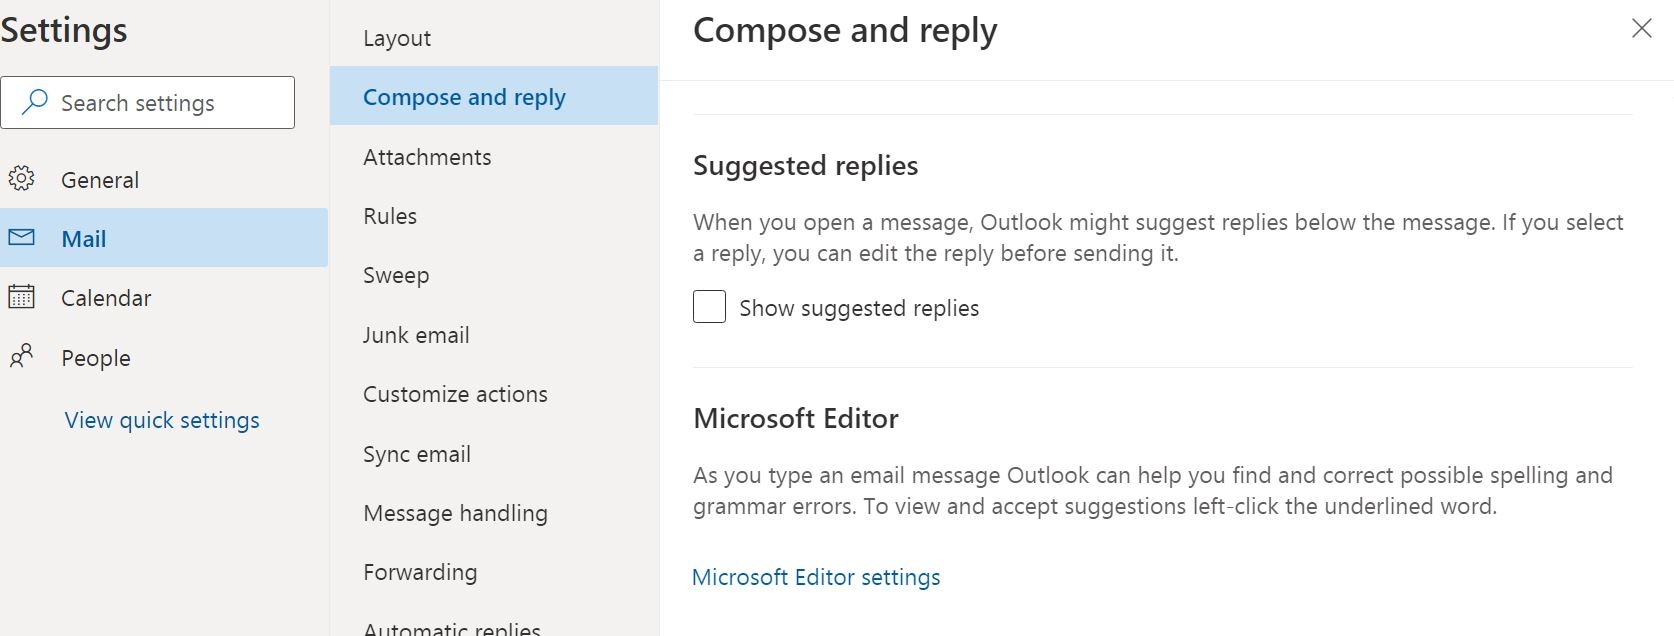 hotmail settings for outlook